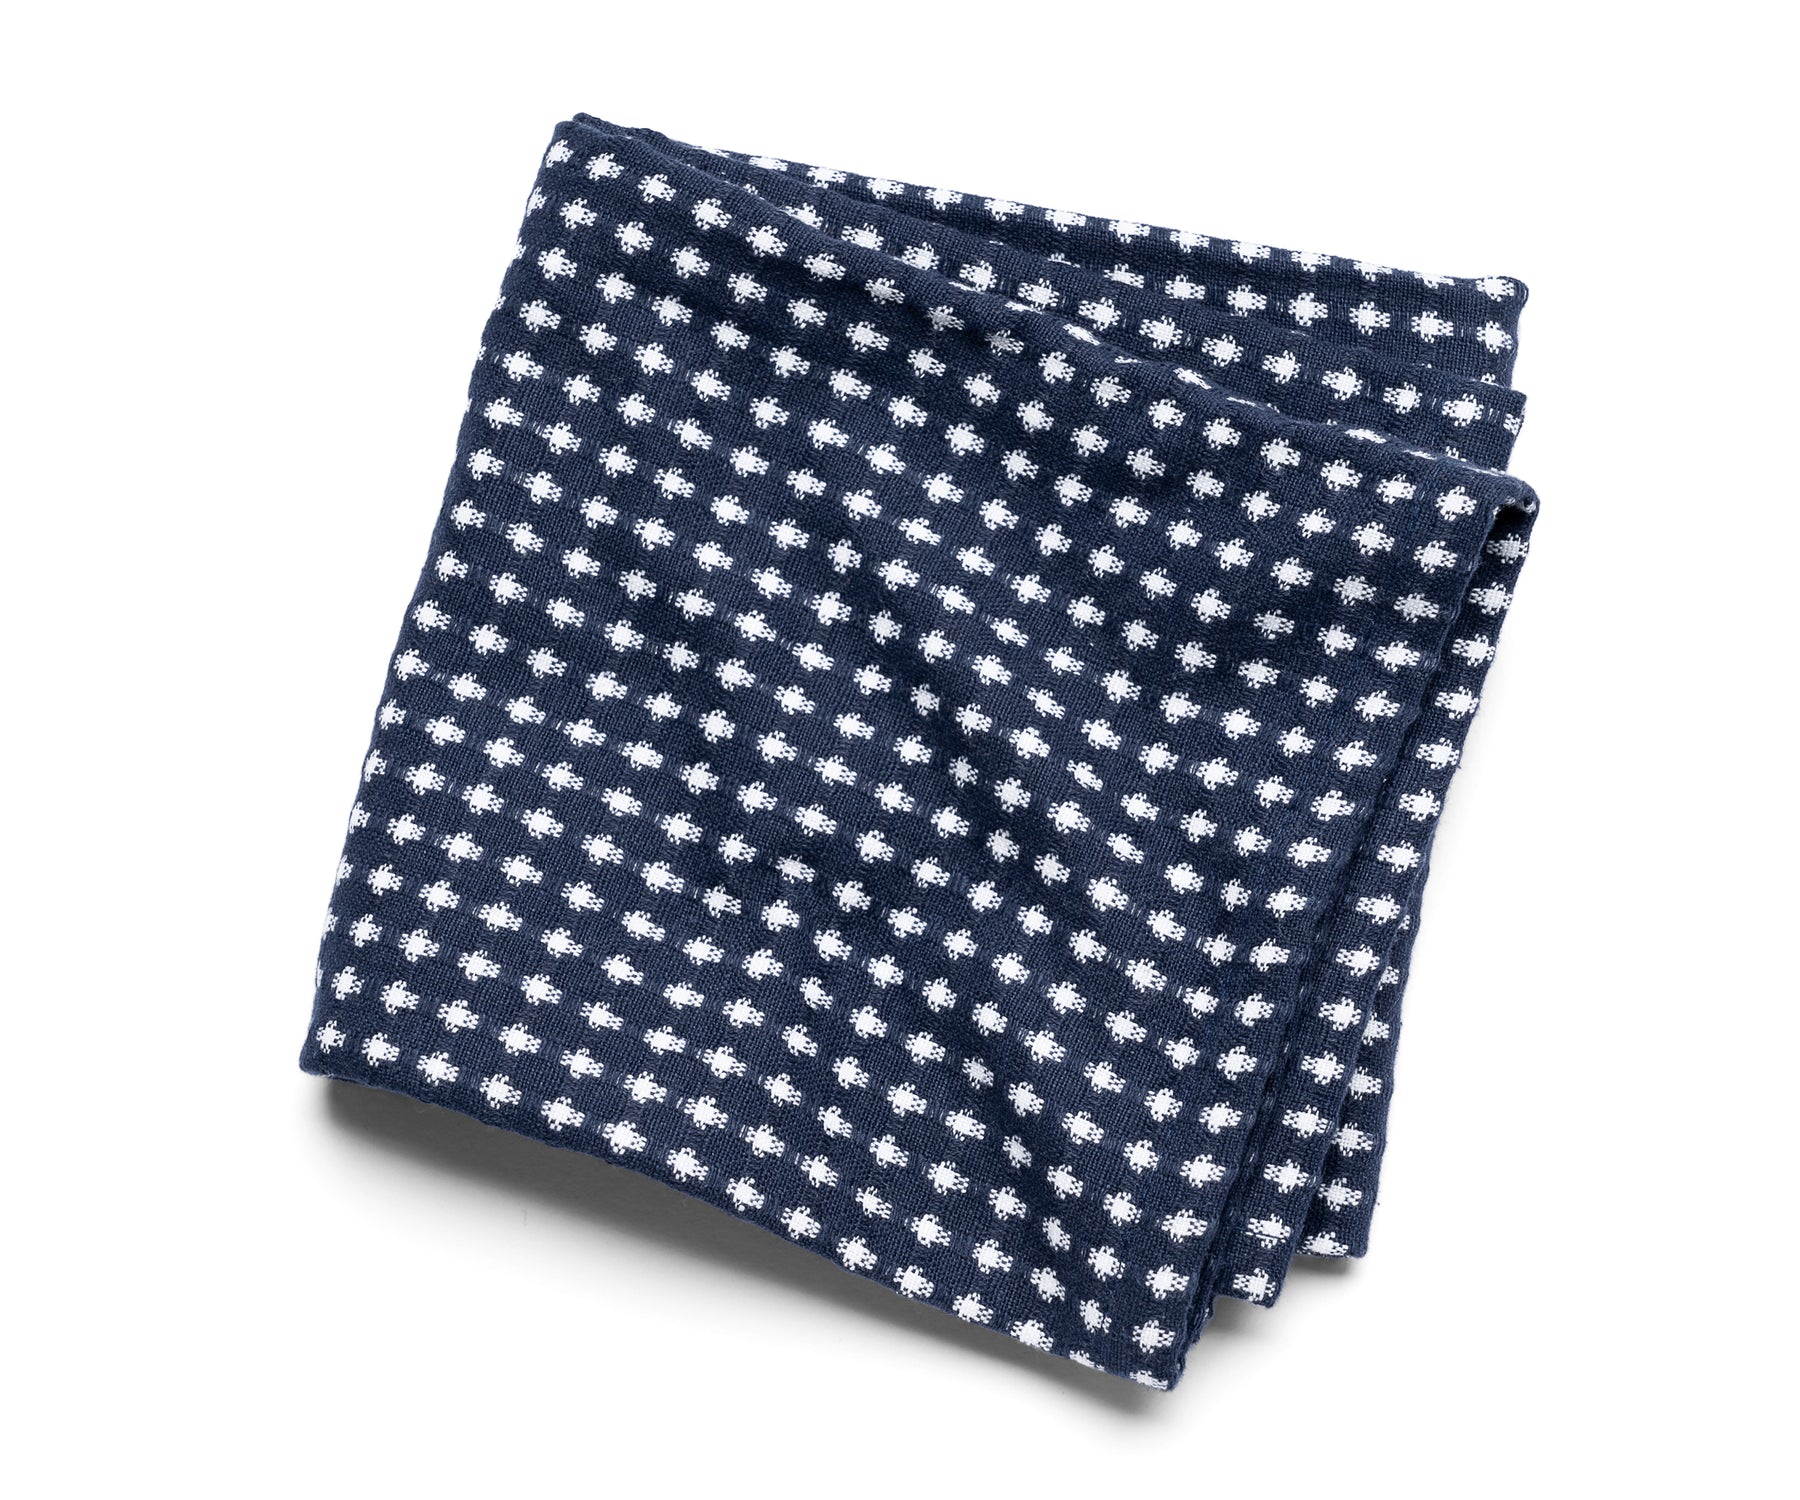 The navy dish towels are crafted with cotton fabric